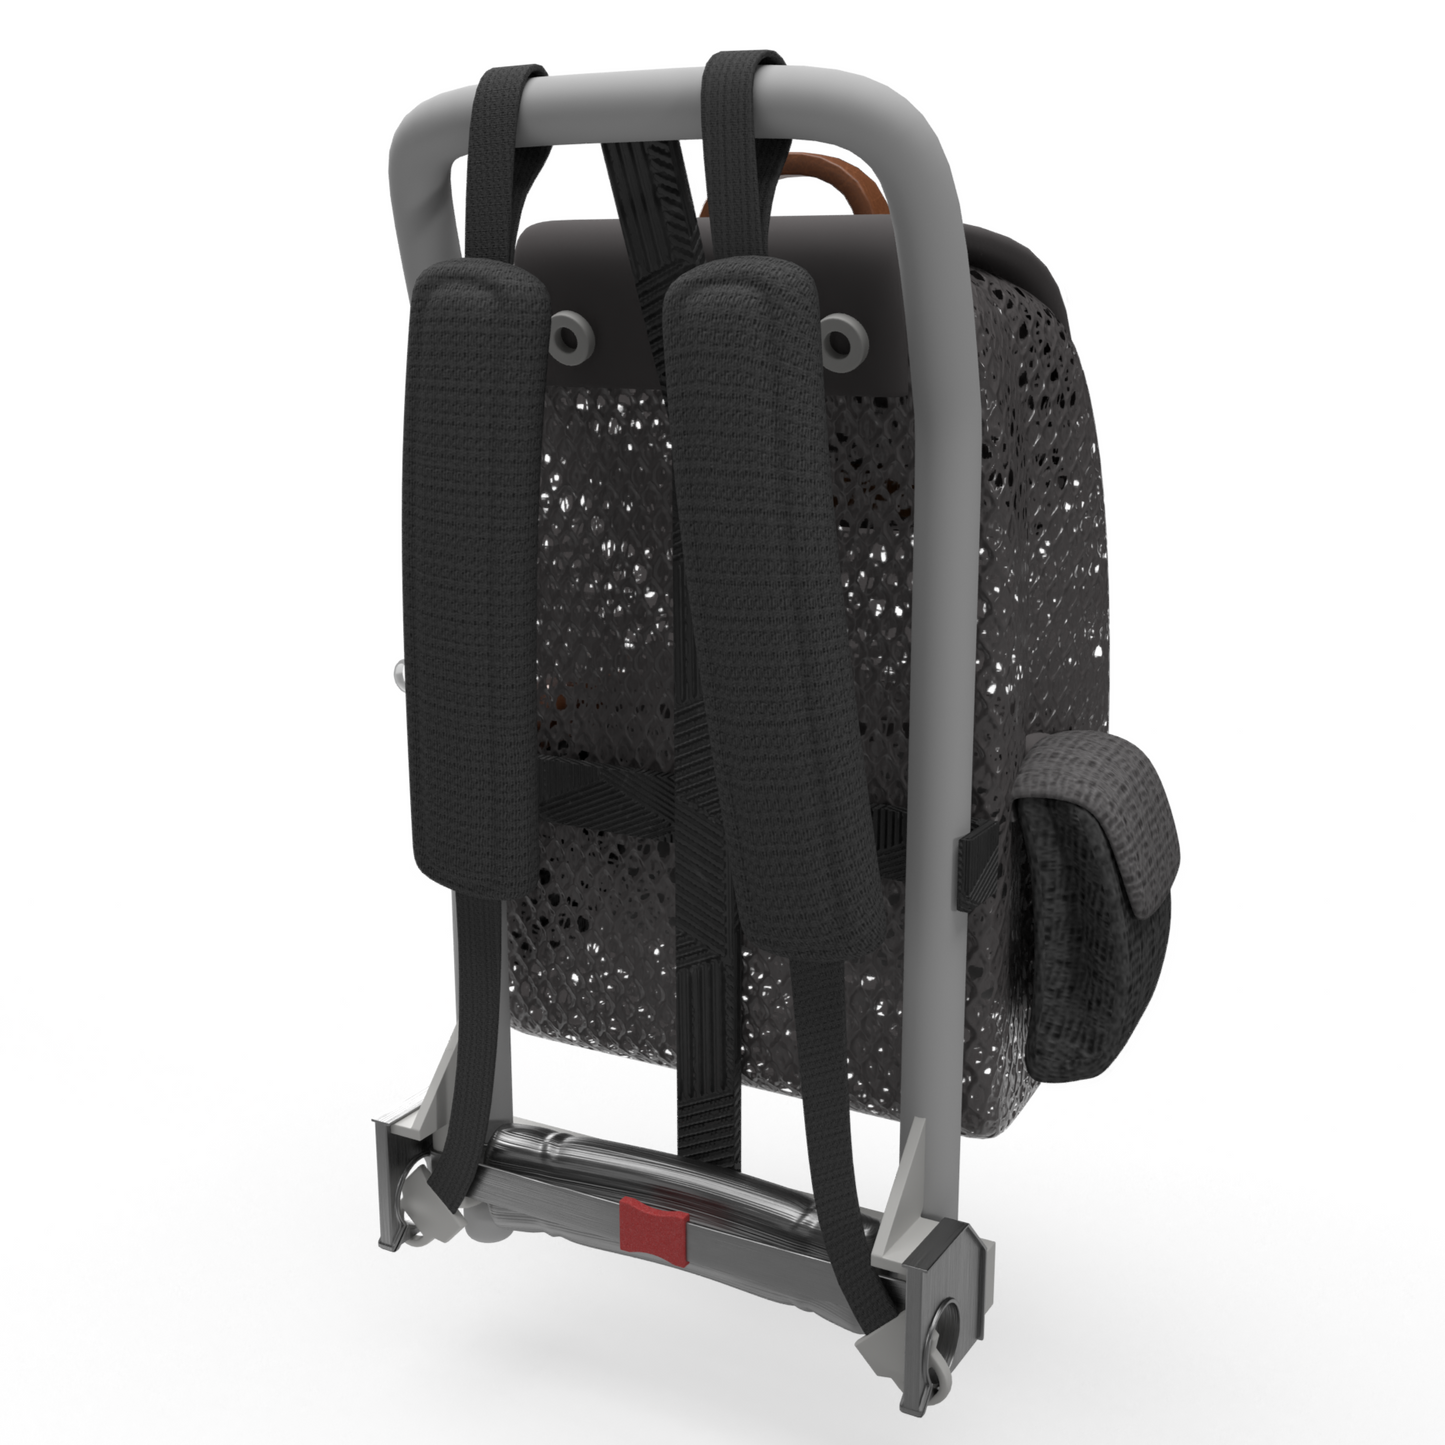 Foragerr Backpack - Ships June 2, 2022 - Reserve Now with a $15 Deposit ($44.95 due when it ships)